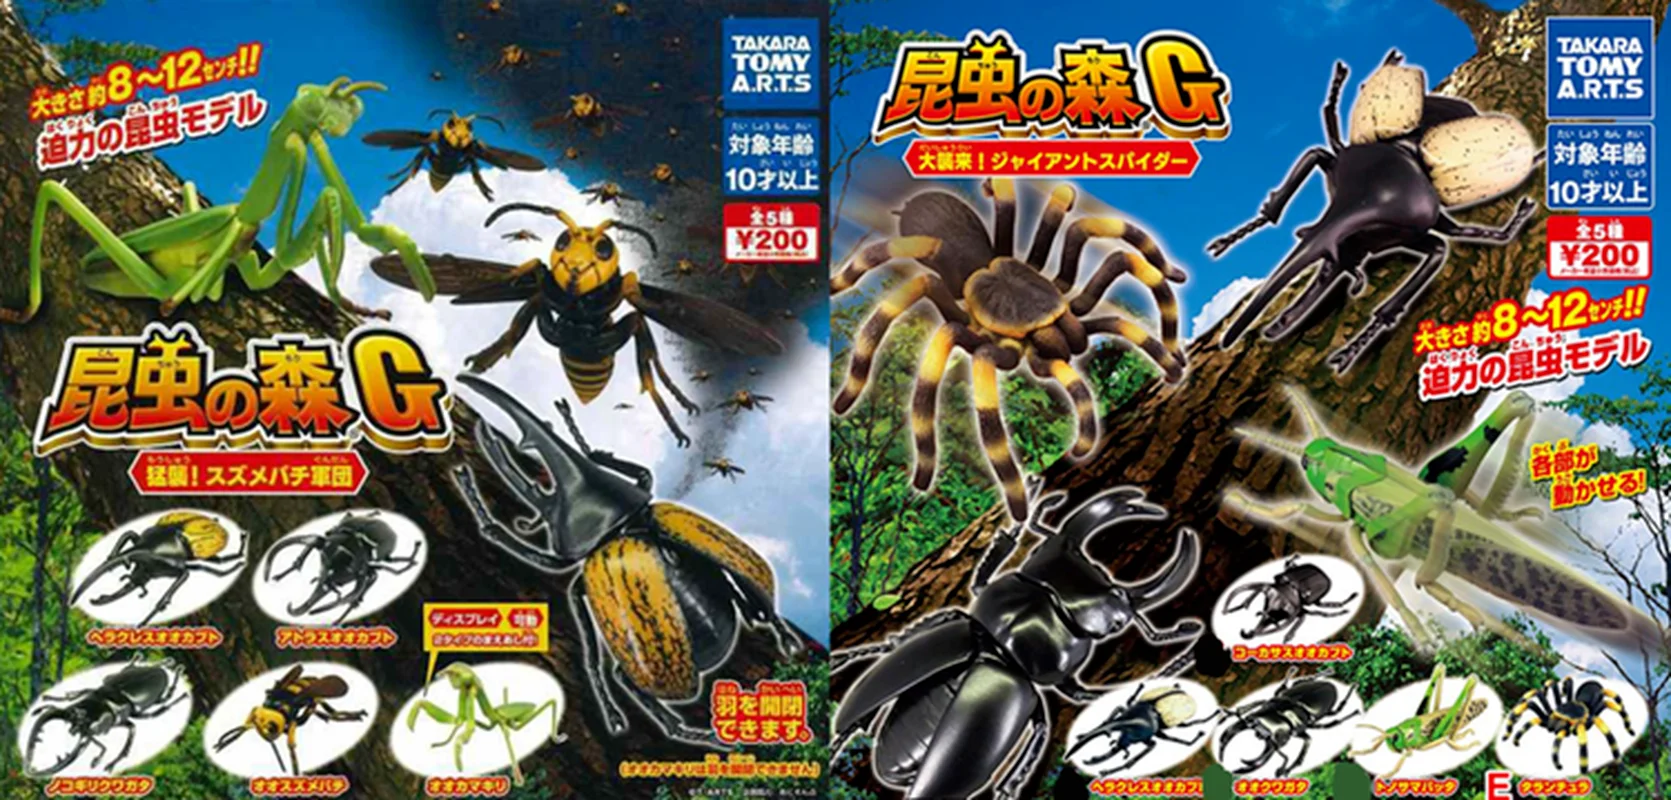 

TAKARA TOMY Genuine Gashapon Toys Insect Forest Beetle Big Spider Grasshopper Simulation Model Action Figure Ornaments